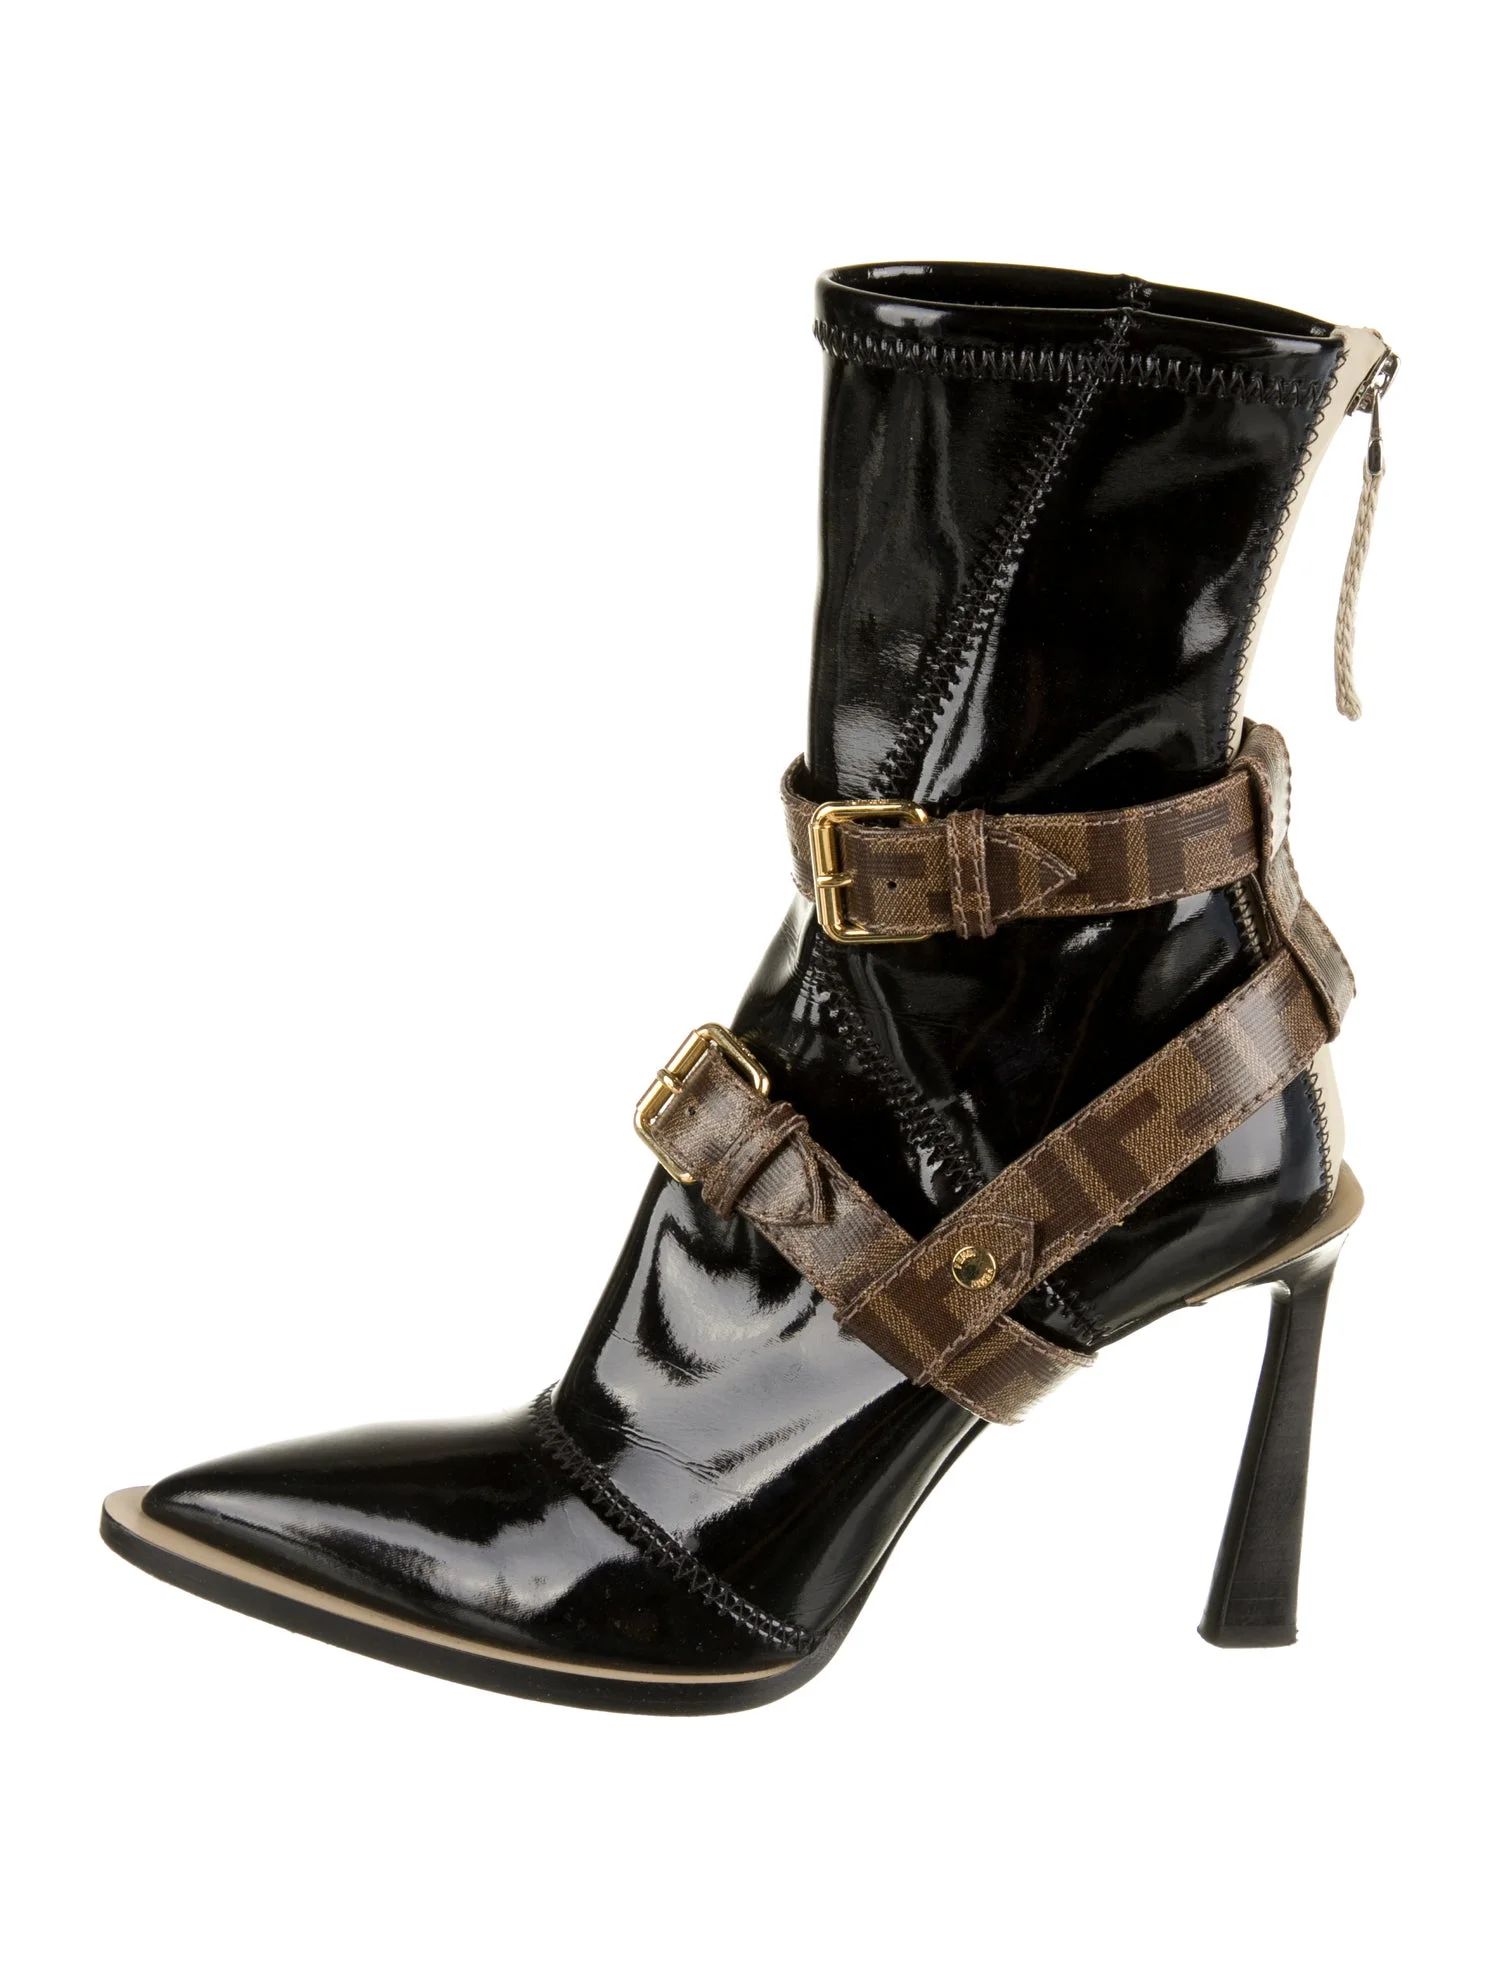 Zucca FF Logo Patent Leather Boots | The RealReal